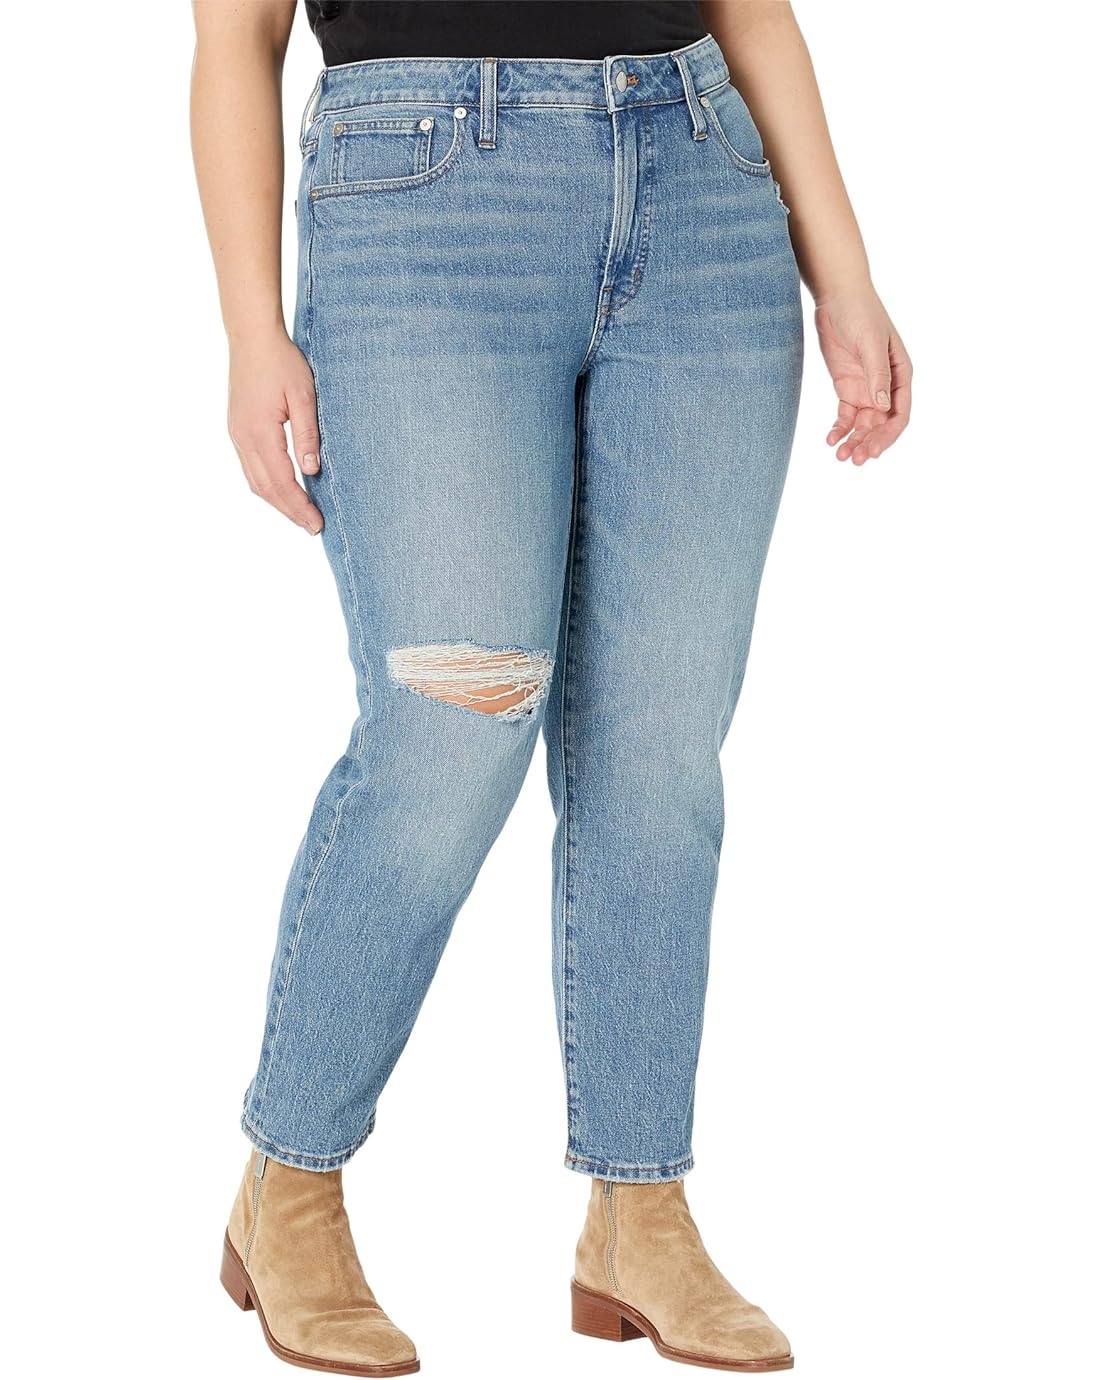 Madewell The Plus Mid-Rise Perfect Vintage Jean in Ainsdale Wash: Knee-Rip Edition